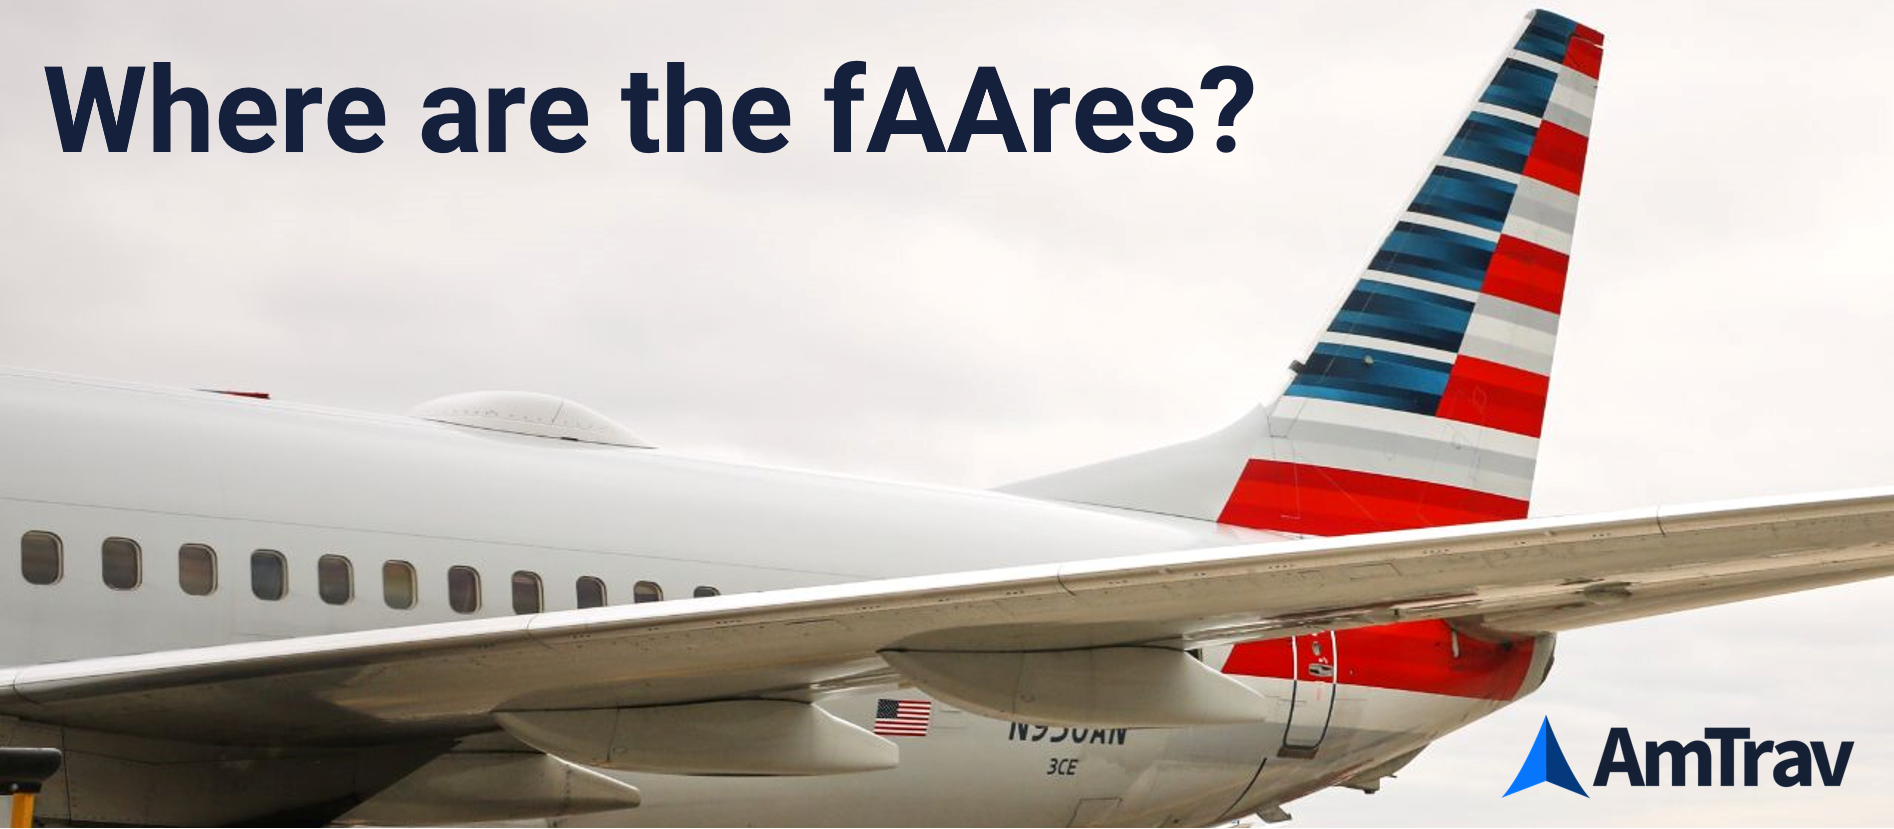 Where are the fAAres?